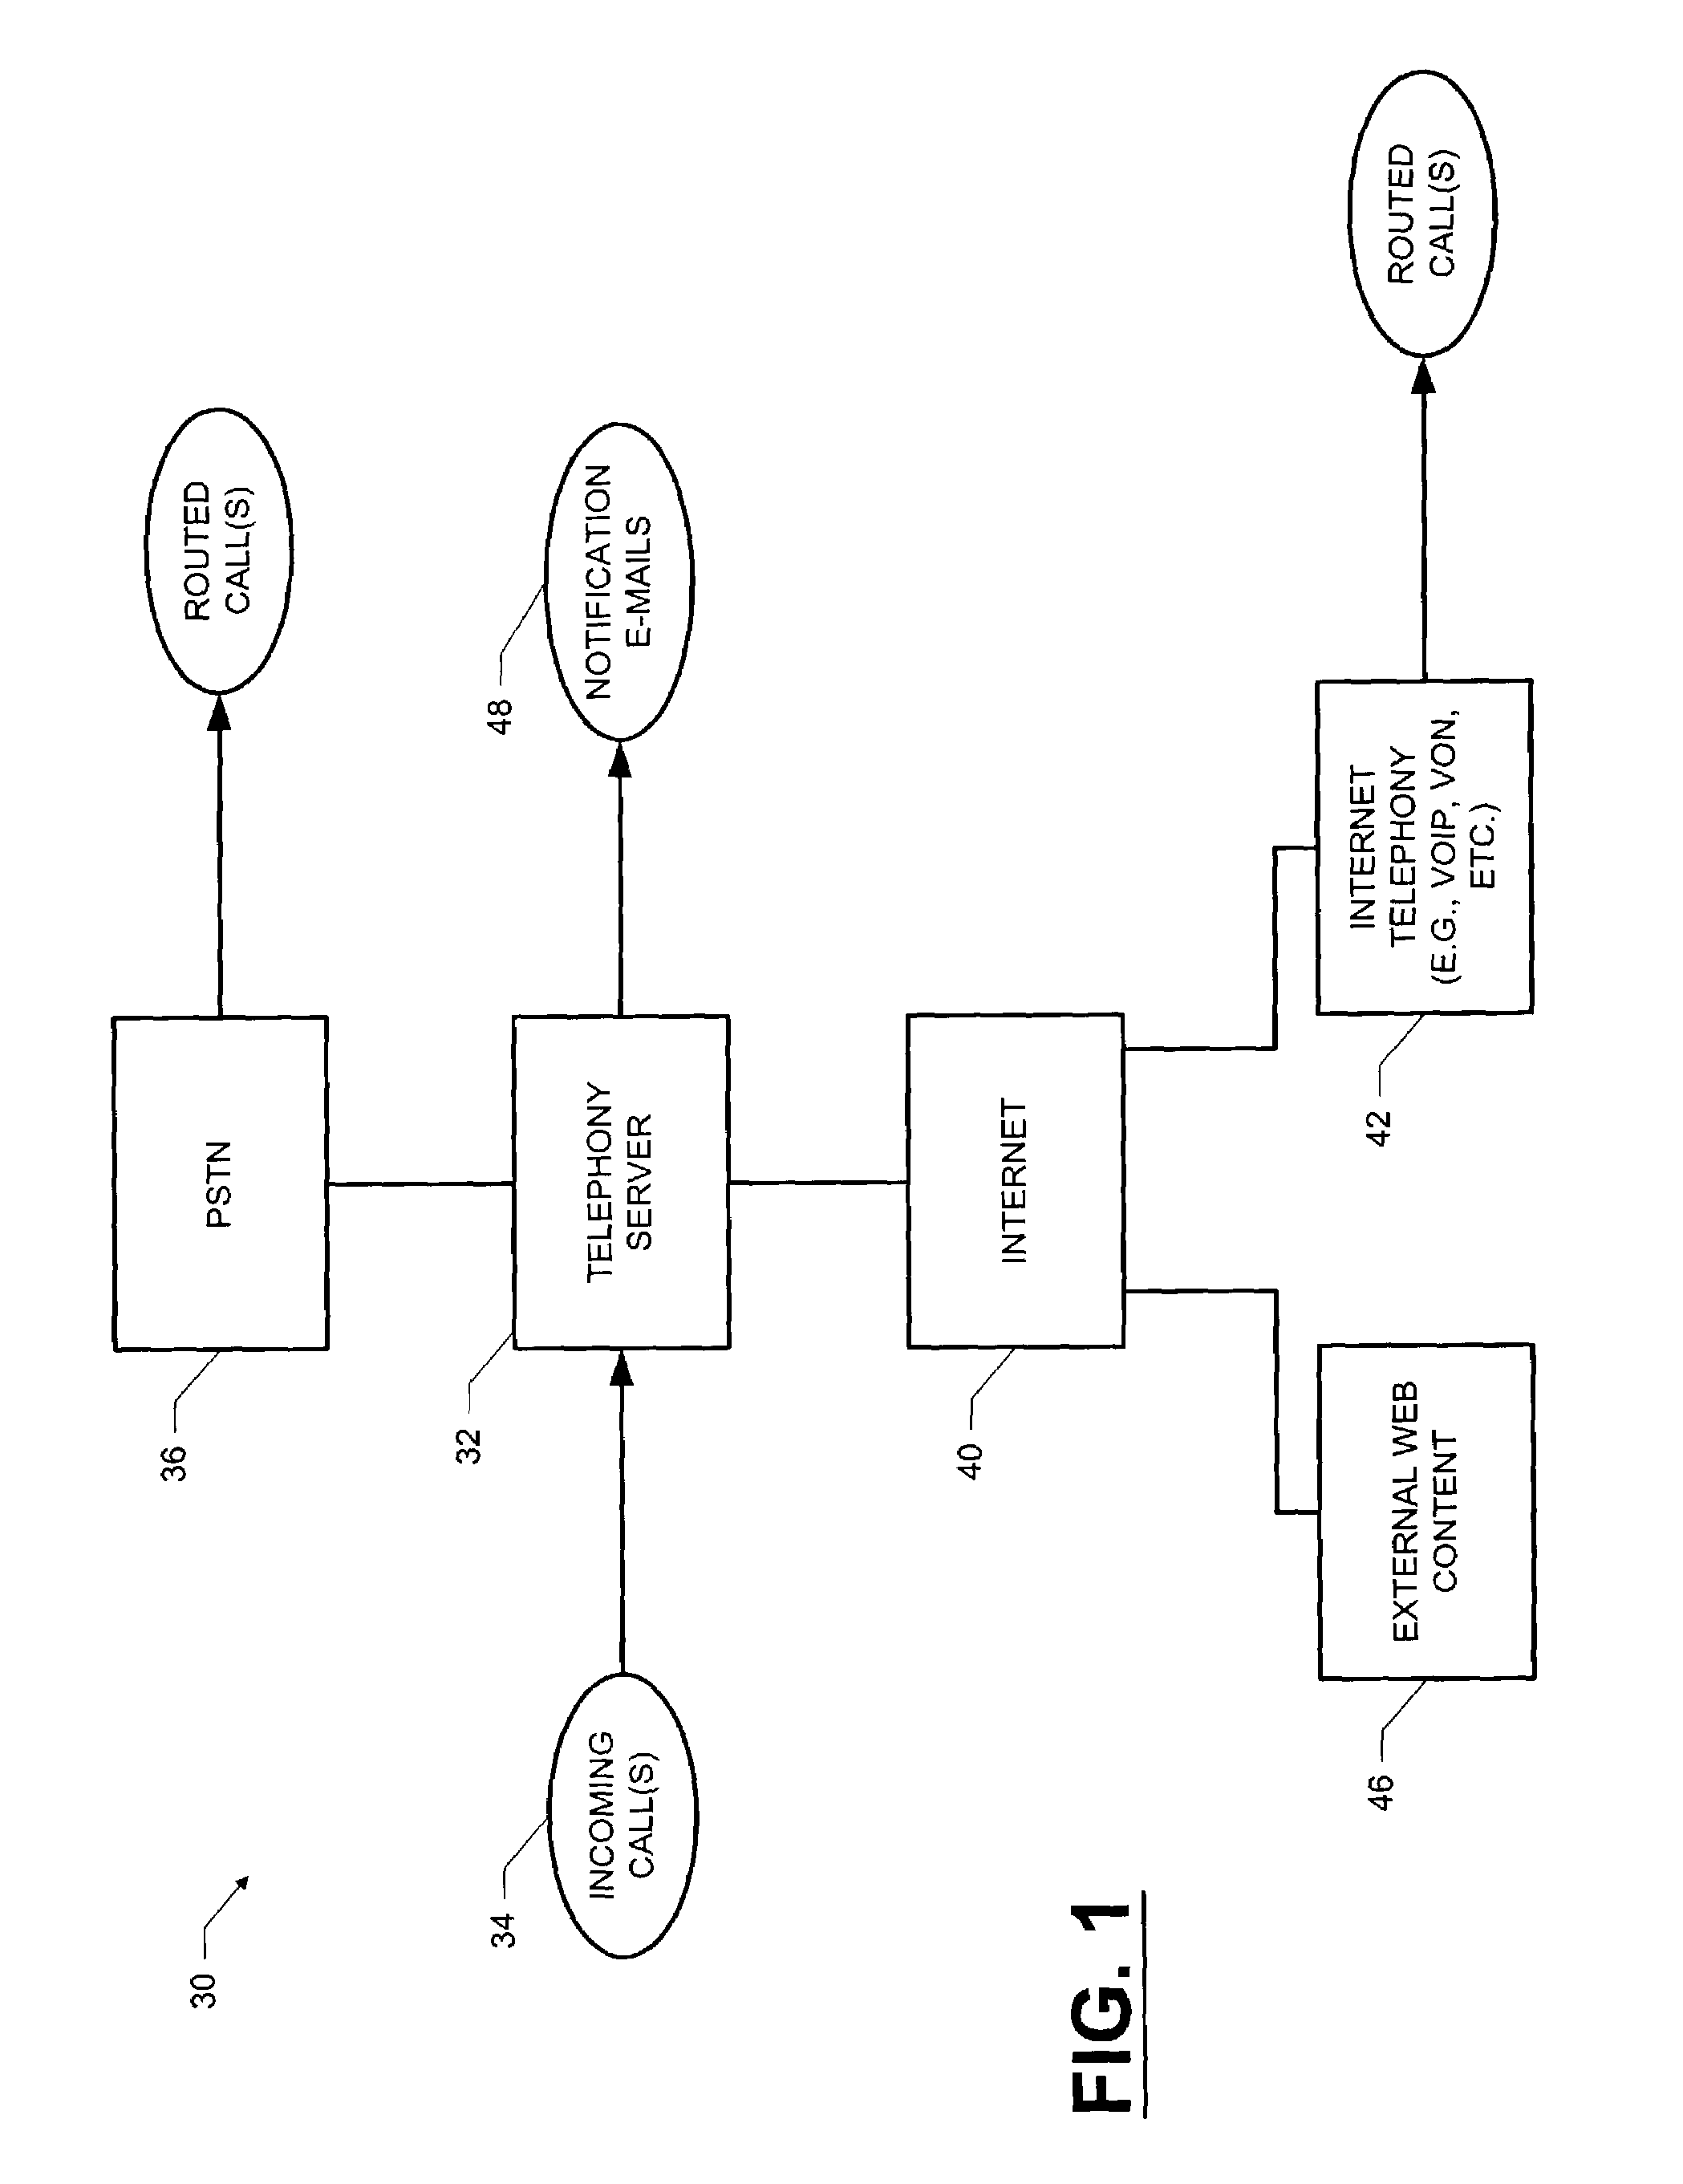 Computer-implemented voice markup system and method